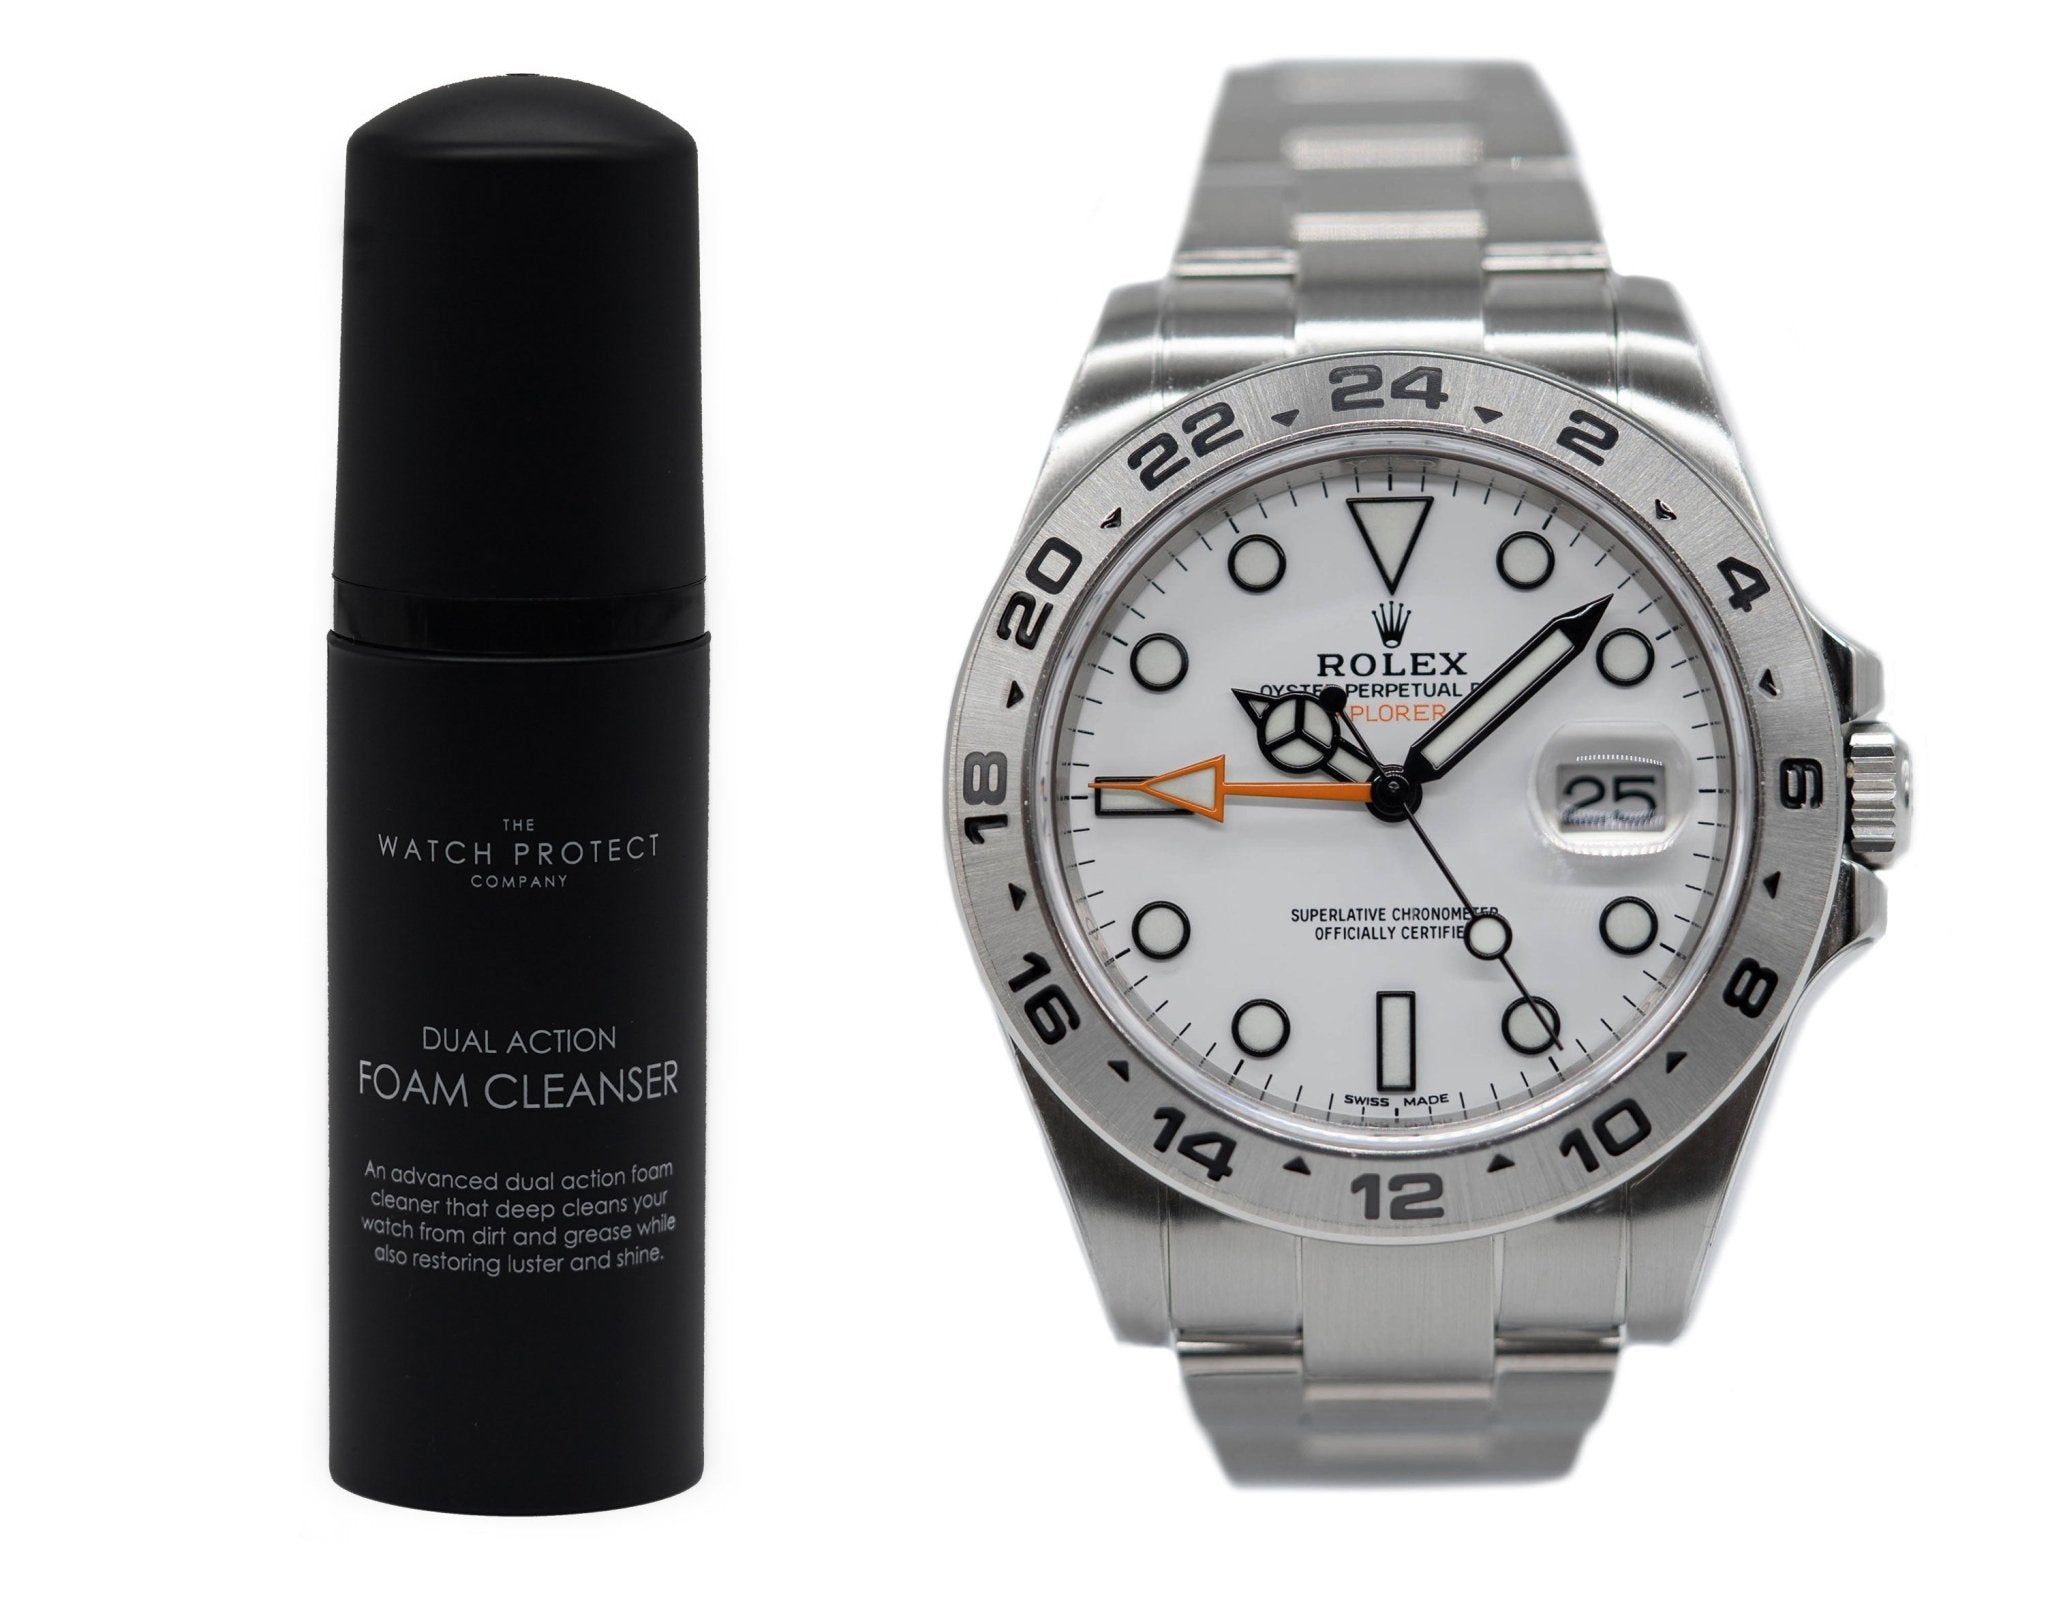 DUAL ACTION FOAM CLEANER & ROLEX EXPLORER II 216750 - TIER 3 - WATCH PROTECTION KIT BUNDLE - The Watch Protect Company